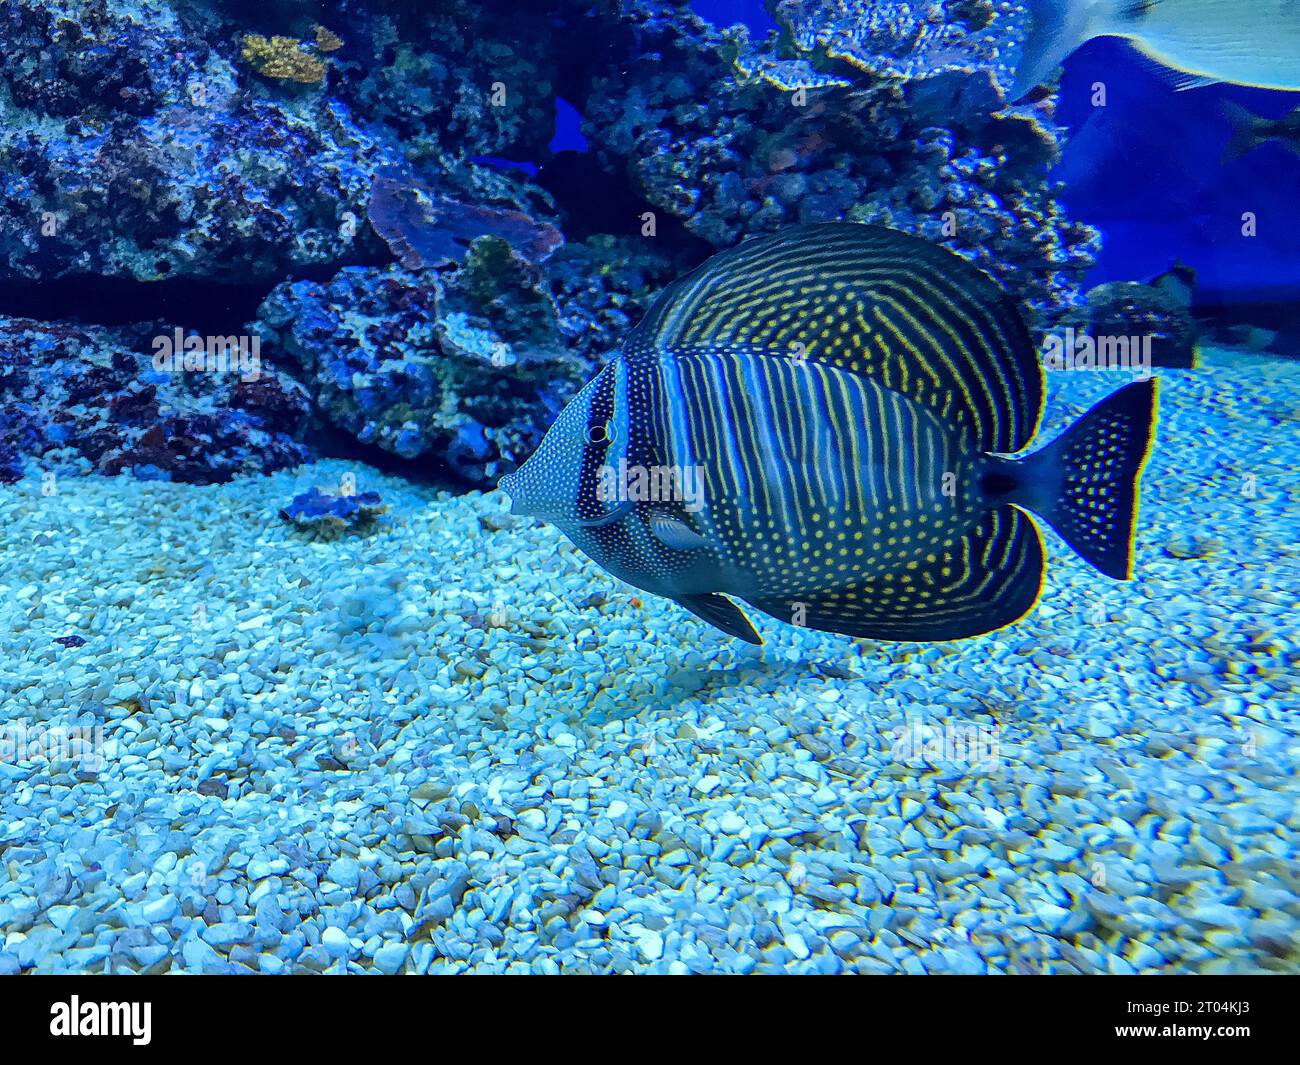 Zebrasoma veliferum fish commonly known as Sailfin Tang swimming in the aquarium of Eilat, Israel's Underwater Observatory Park Stock Photo